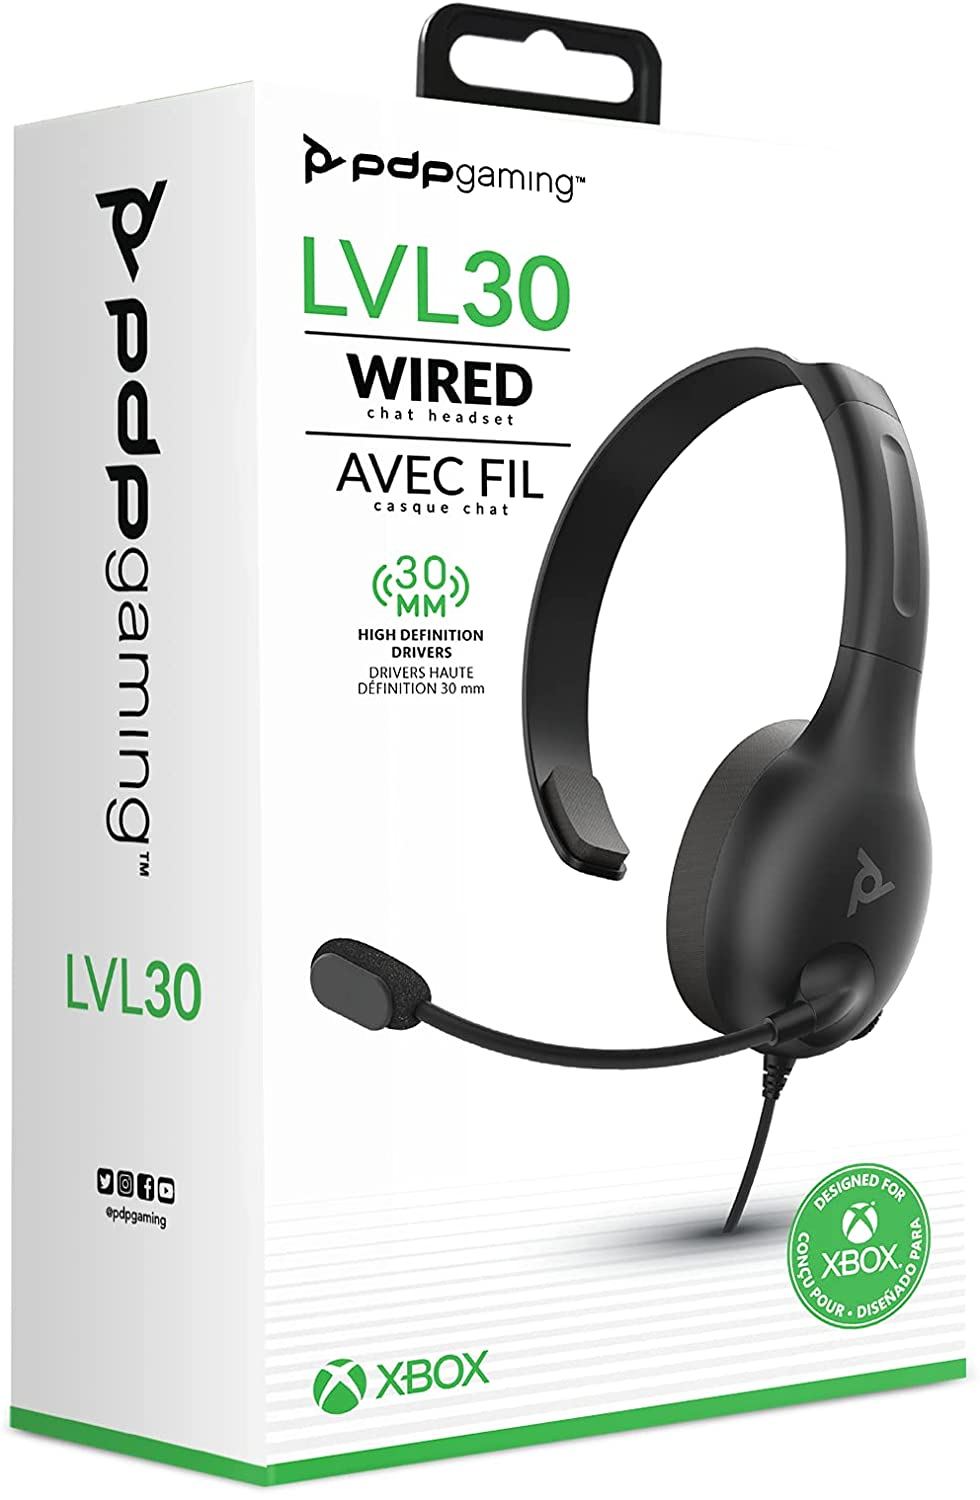 LVL30 Xbox, PC, Wired Chat Headset - Pdp Gaming, White